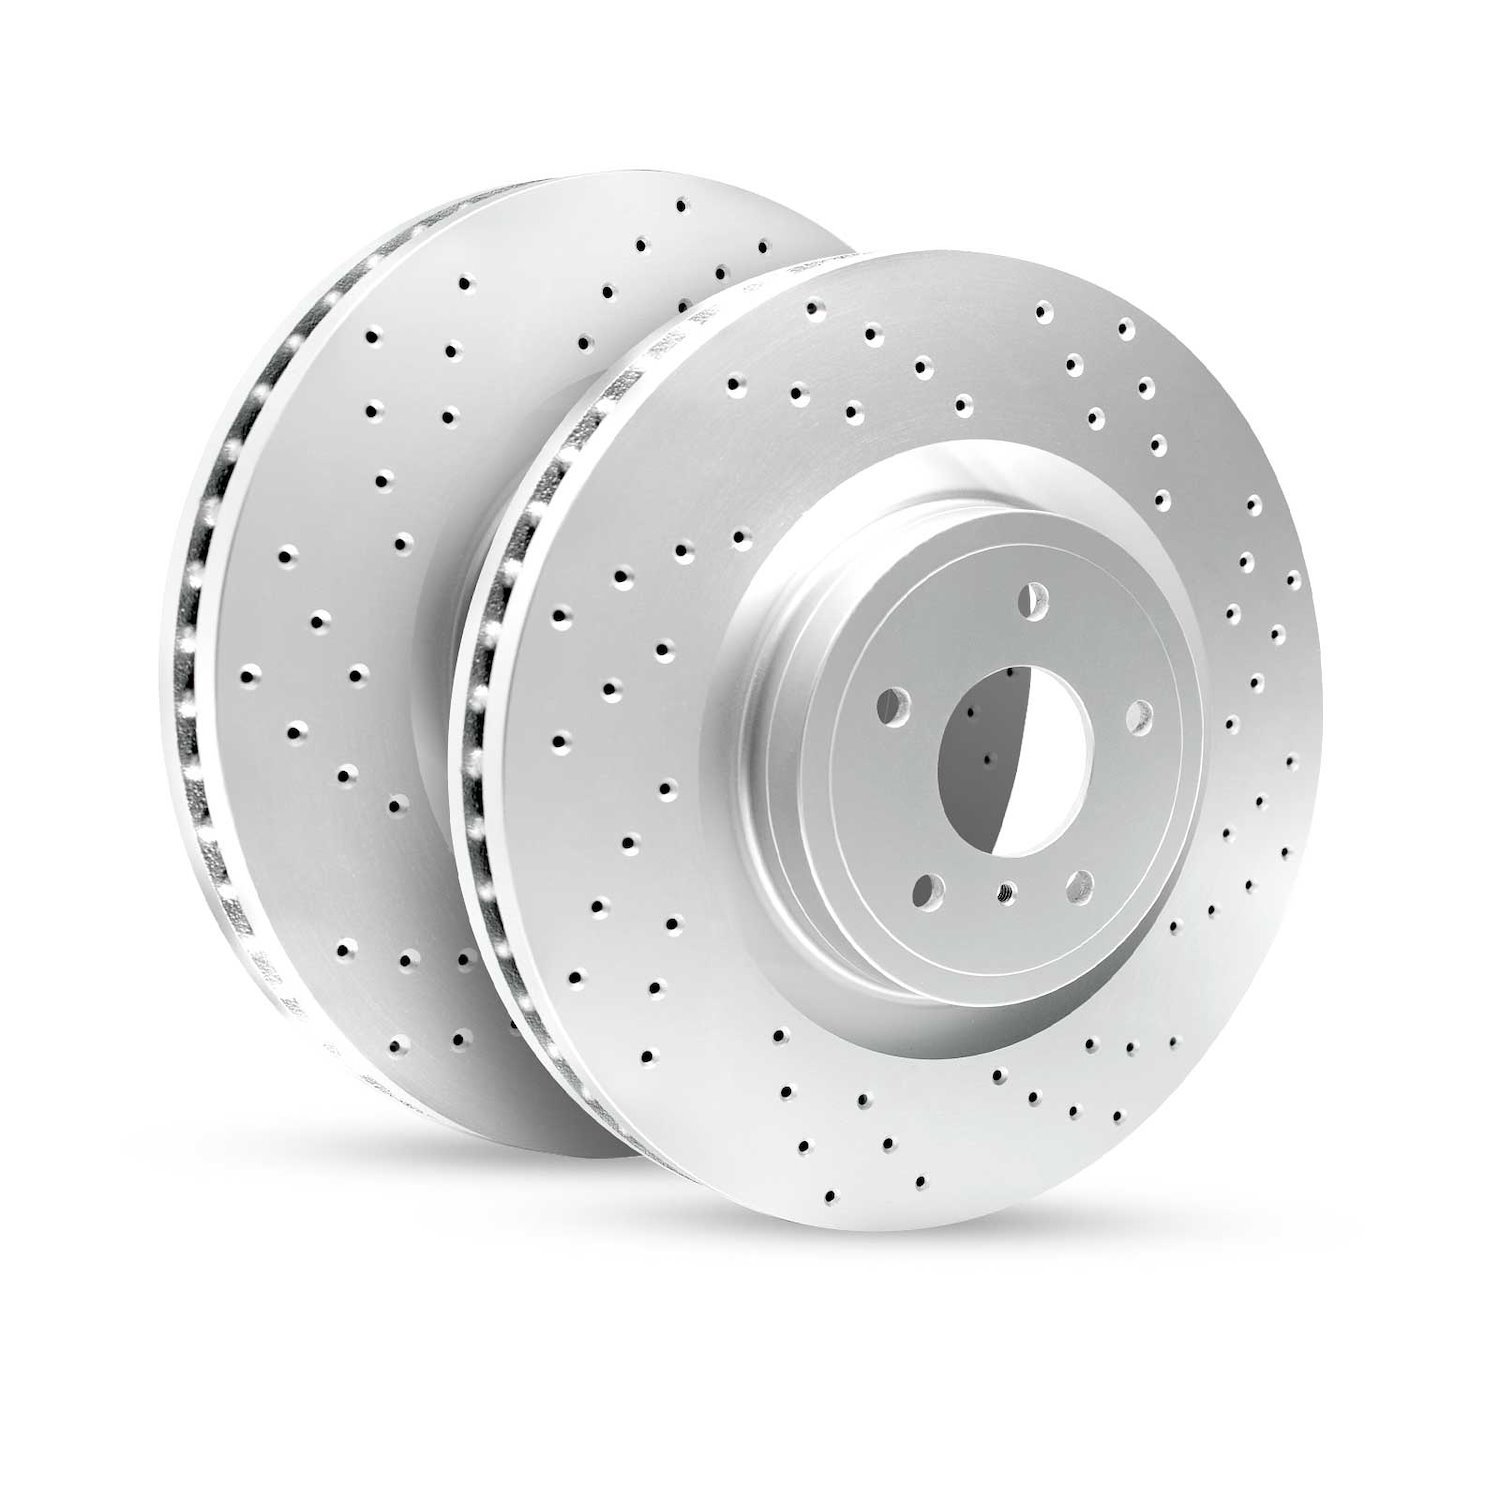 GEO-Carbon Drilled/Slotted Rotors, 2005-2010 Acura/Honda, Position: Rear